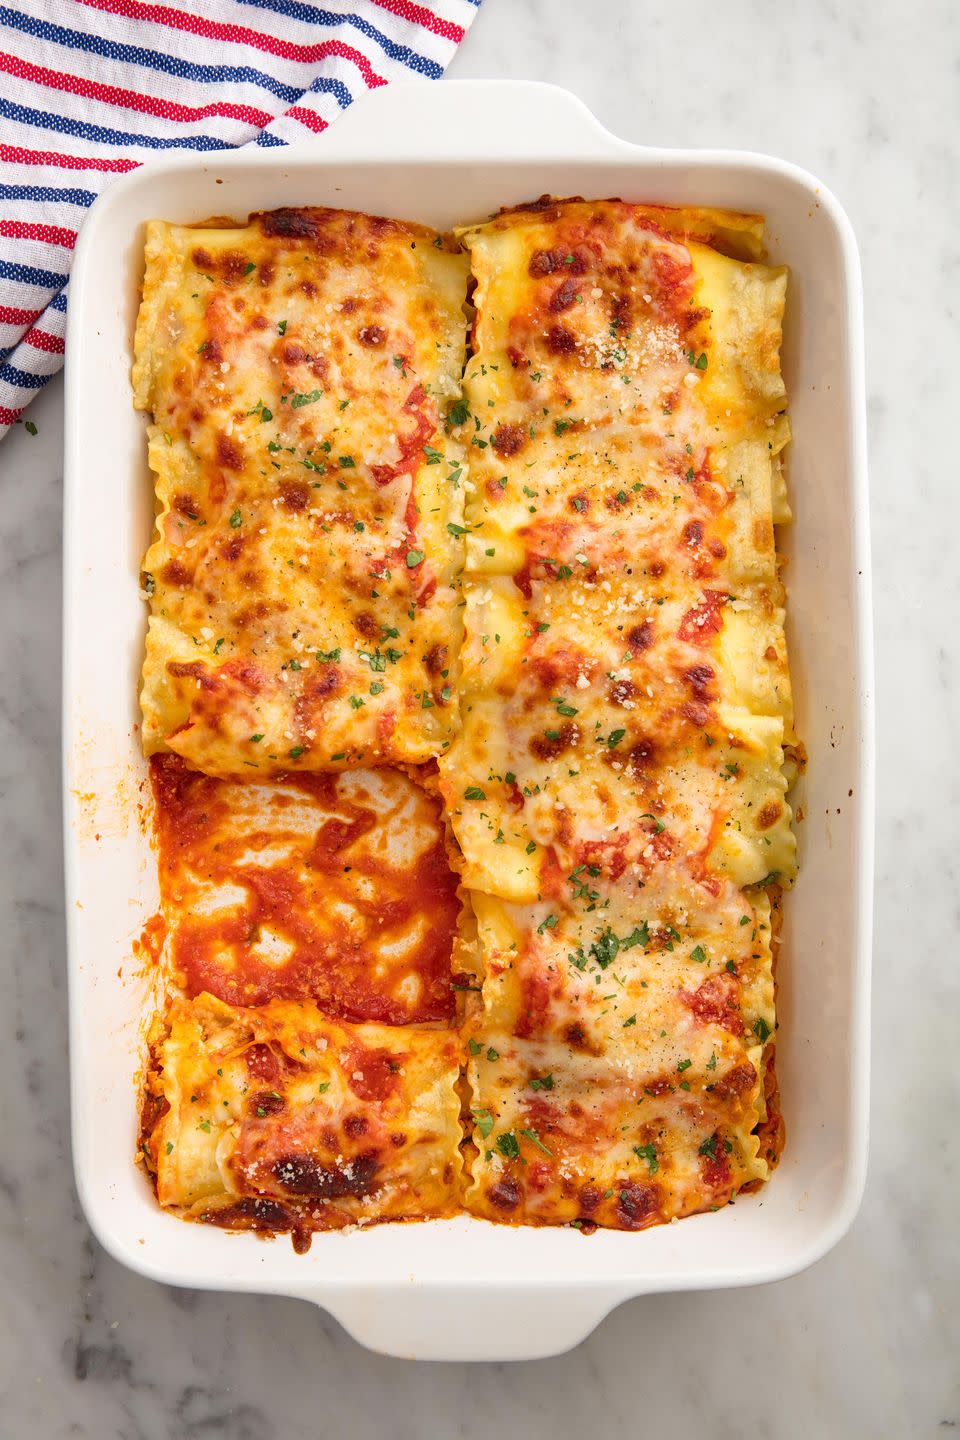 <p><a href="https://www.delish.com/cooking/recipe-ideas/recipes/a51337/classic-lasagna-recipe/" rel="nofollow noopener" target="_blank" data-ylk="slk:Classic lasagna" class="link ">Classic lasagna</a>, as much as we adore it, can be extremely time-consuming. These roll-ups come together in no time and couldn't be more delicious. This spinach and ricotta version (but feel free to add meat if you like!) is quick and simple and still every bit as comforting as the traditional.</p><p>Get the <strong><a href="https://www.delish.com/cooking/recipe-ideas/recipes/a57970/best-lasagna-roll-ups-recipe/" rel="nofollow noopener" target="_blank" data-ylk="slk:Lasagna Roll-Ups recipe" class="link ">Lasagna Roll-Ups recipe</a>.</strong></p>